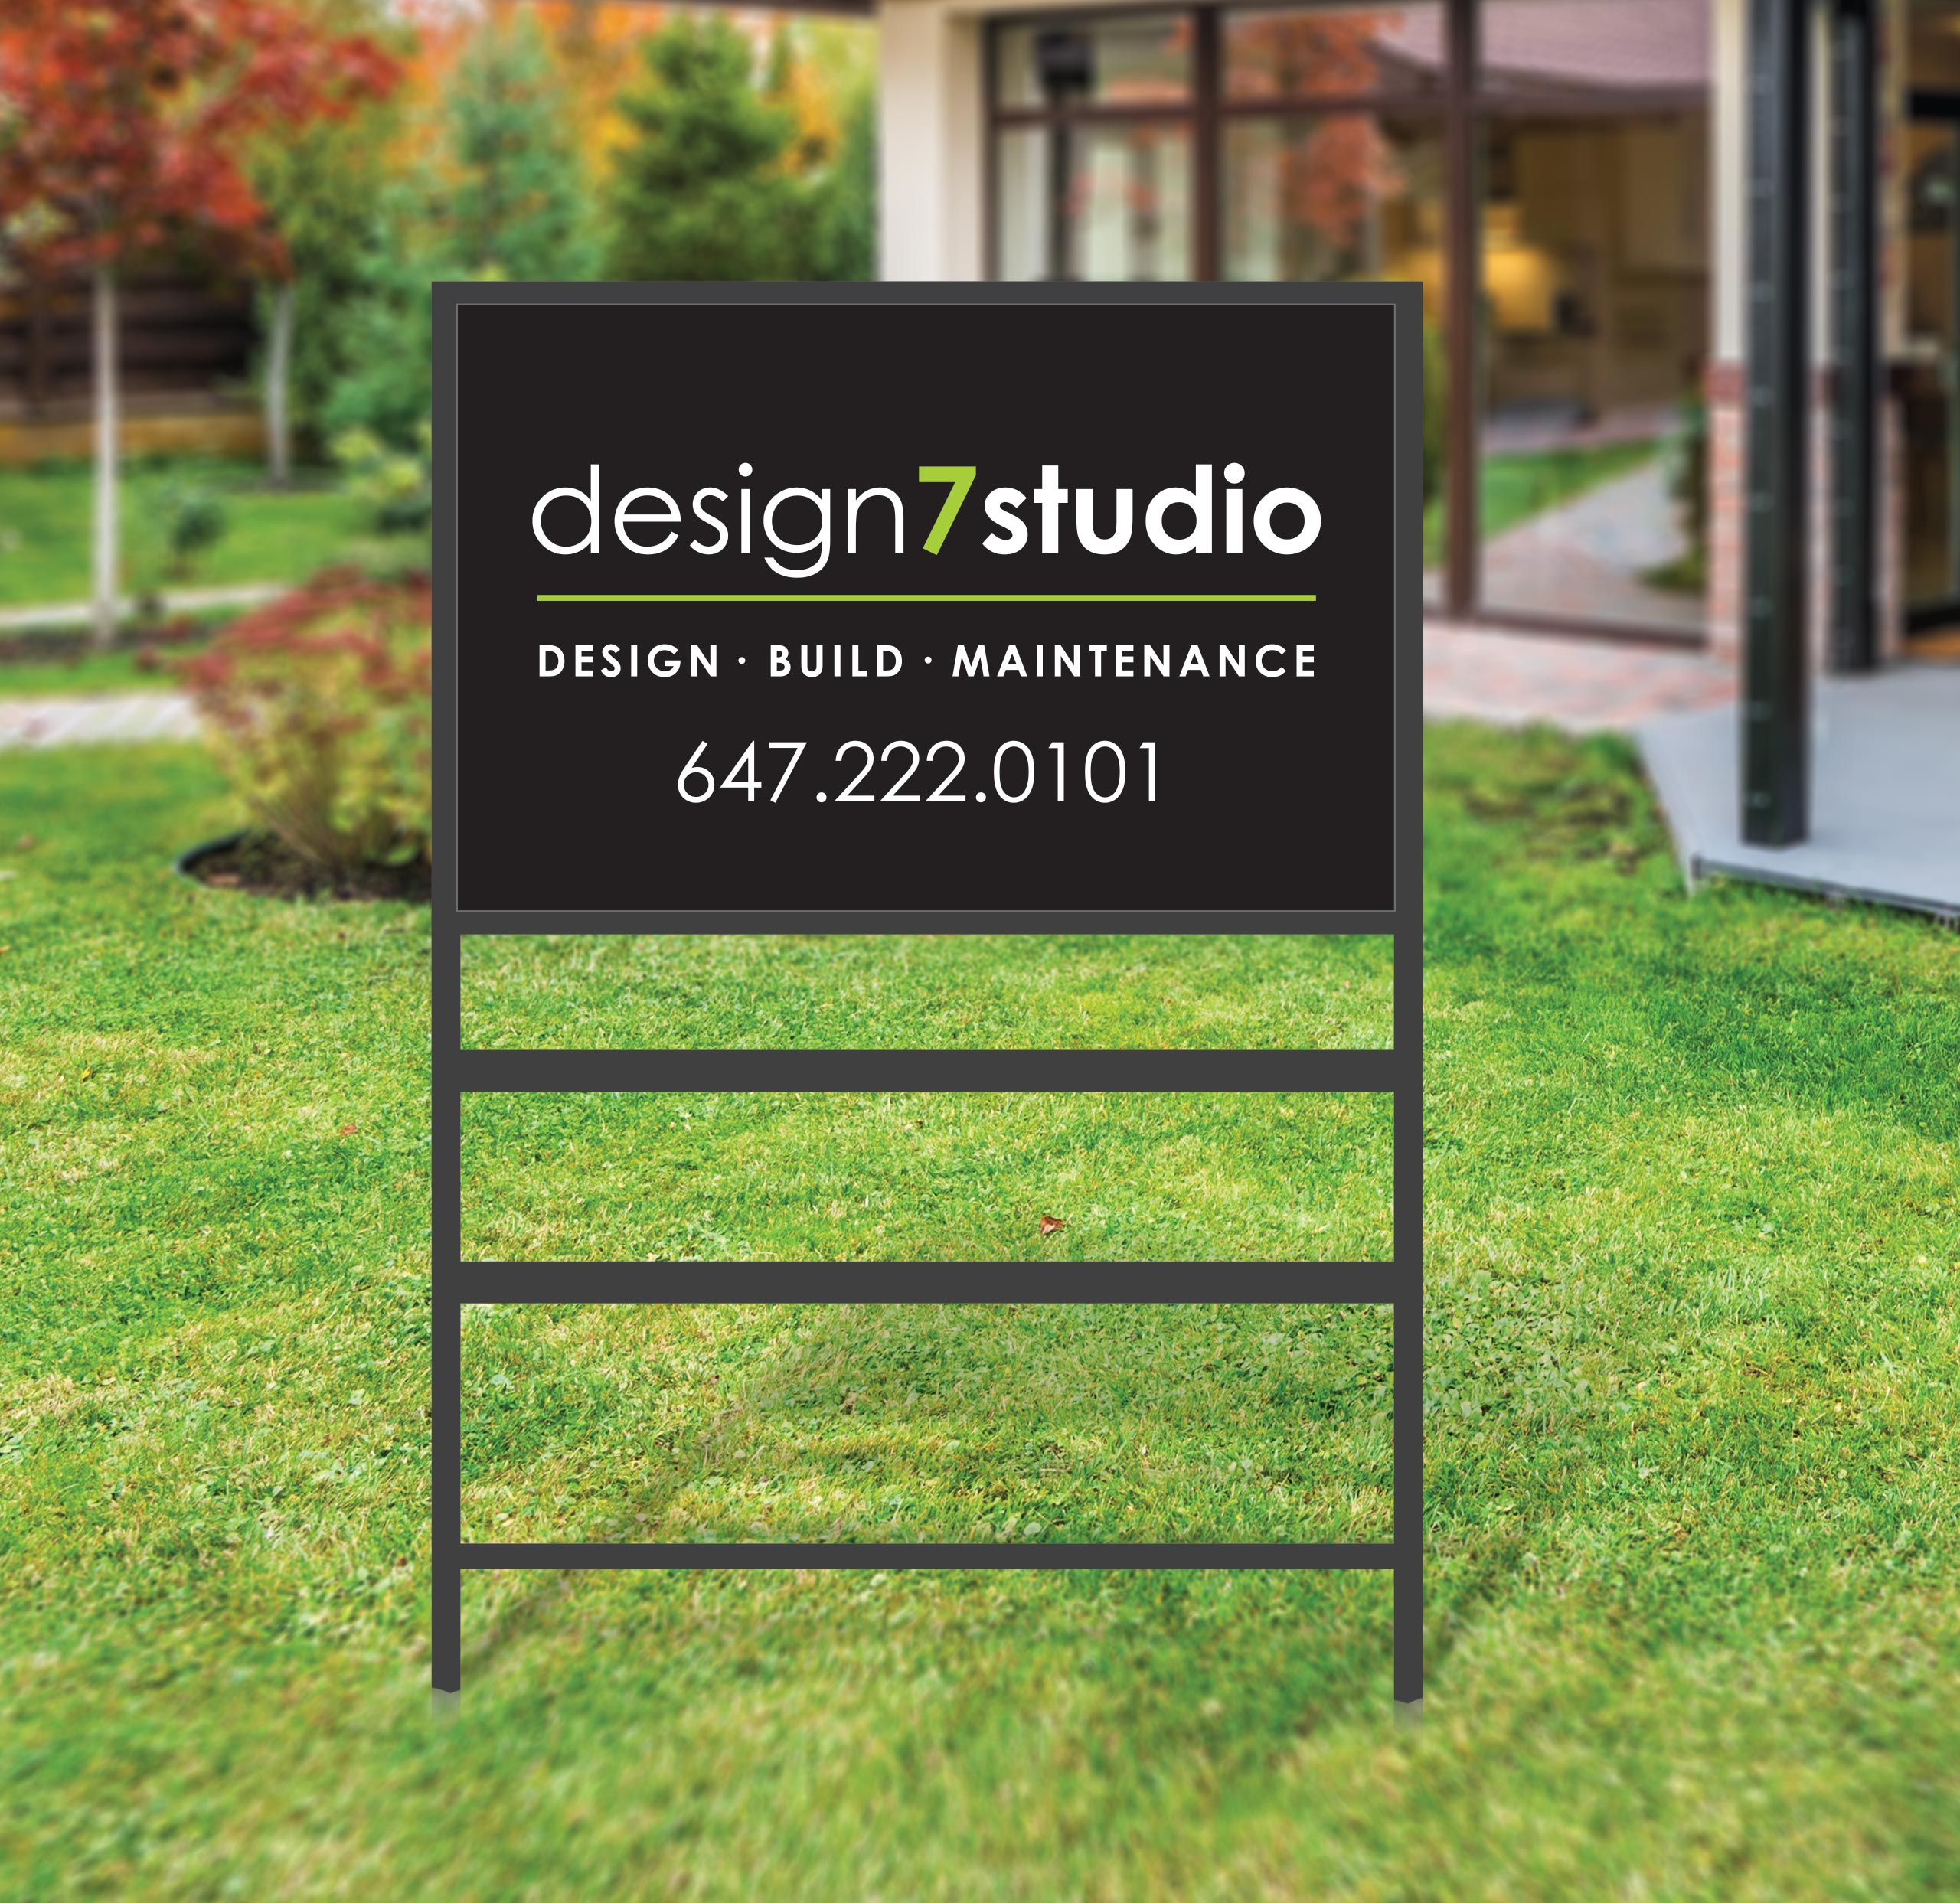 Custom-printed metal lawn sign showcasing durability and personalized design